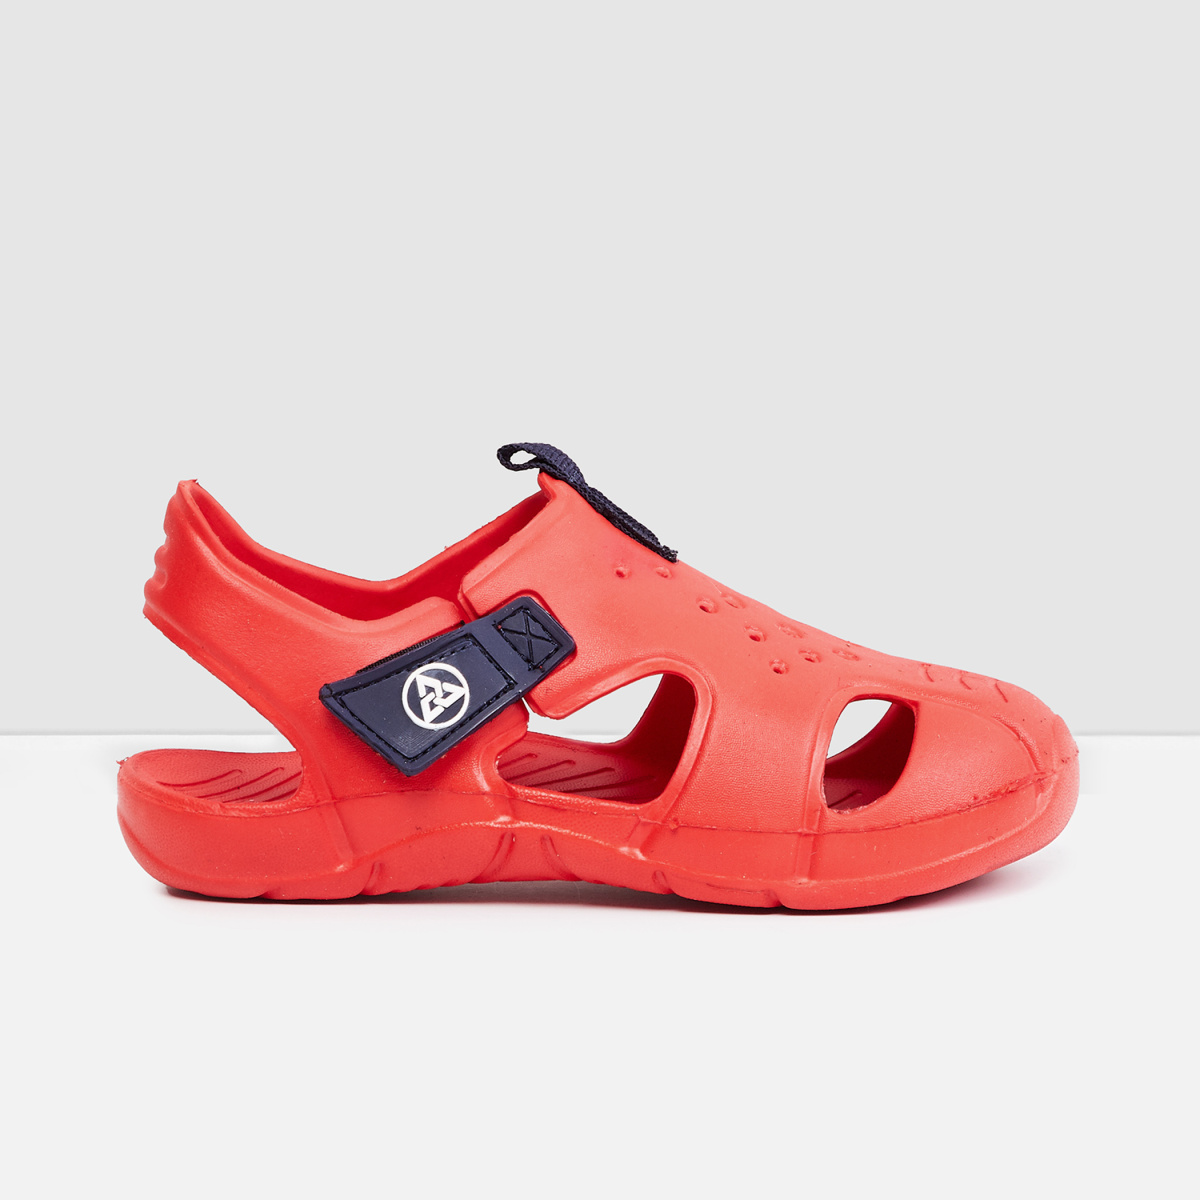 MAX Solid Closed-Toe Sandals with Velcro Closure